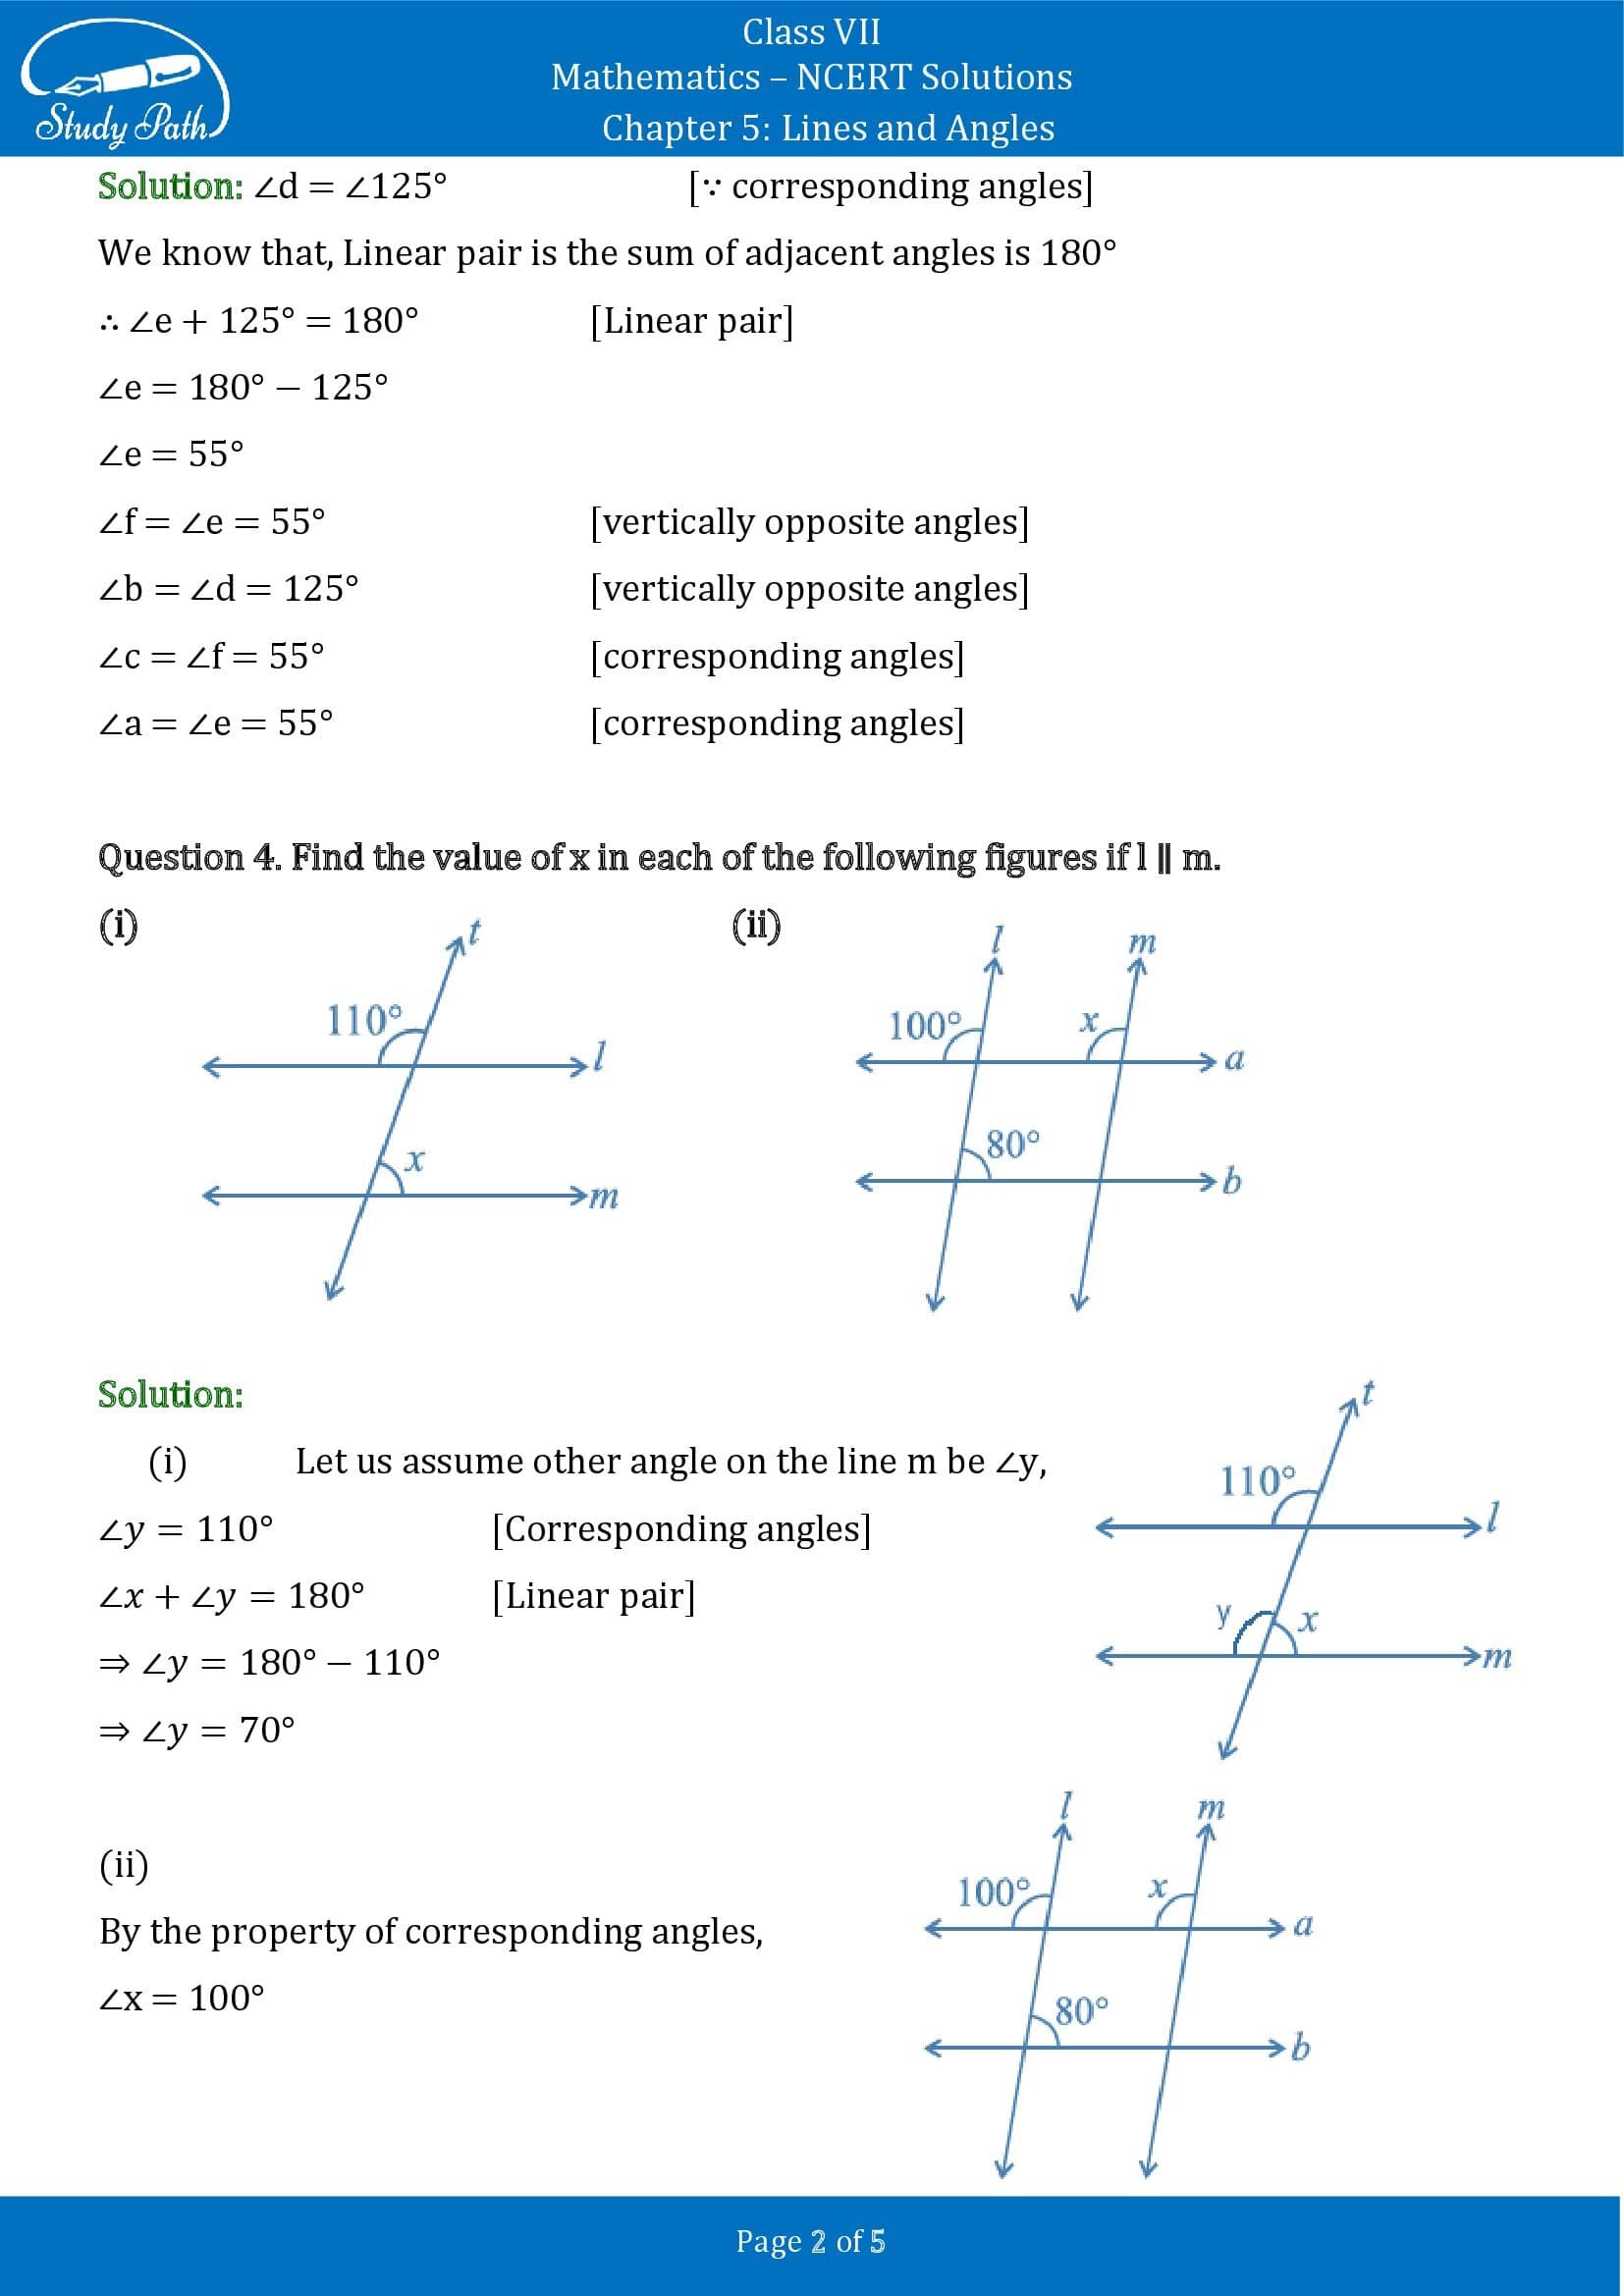 NCERT Solutions for Class 7 Maths Chapter 5 Lines and Angles Exercise 5.2 00002